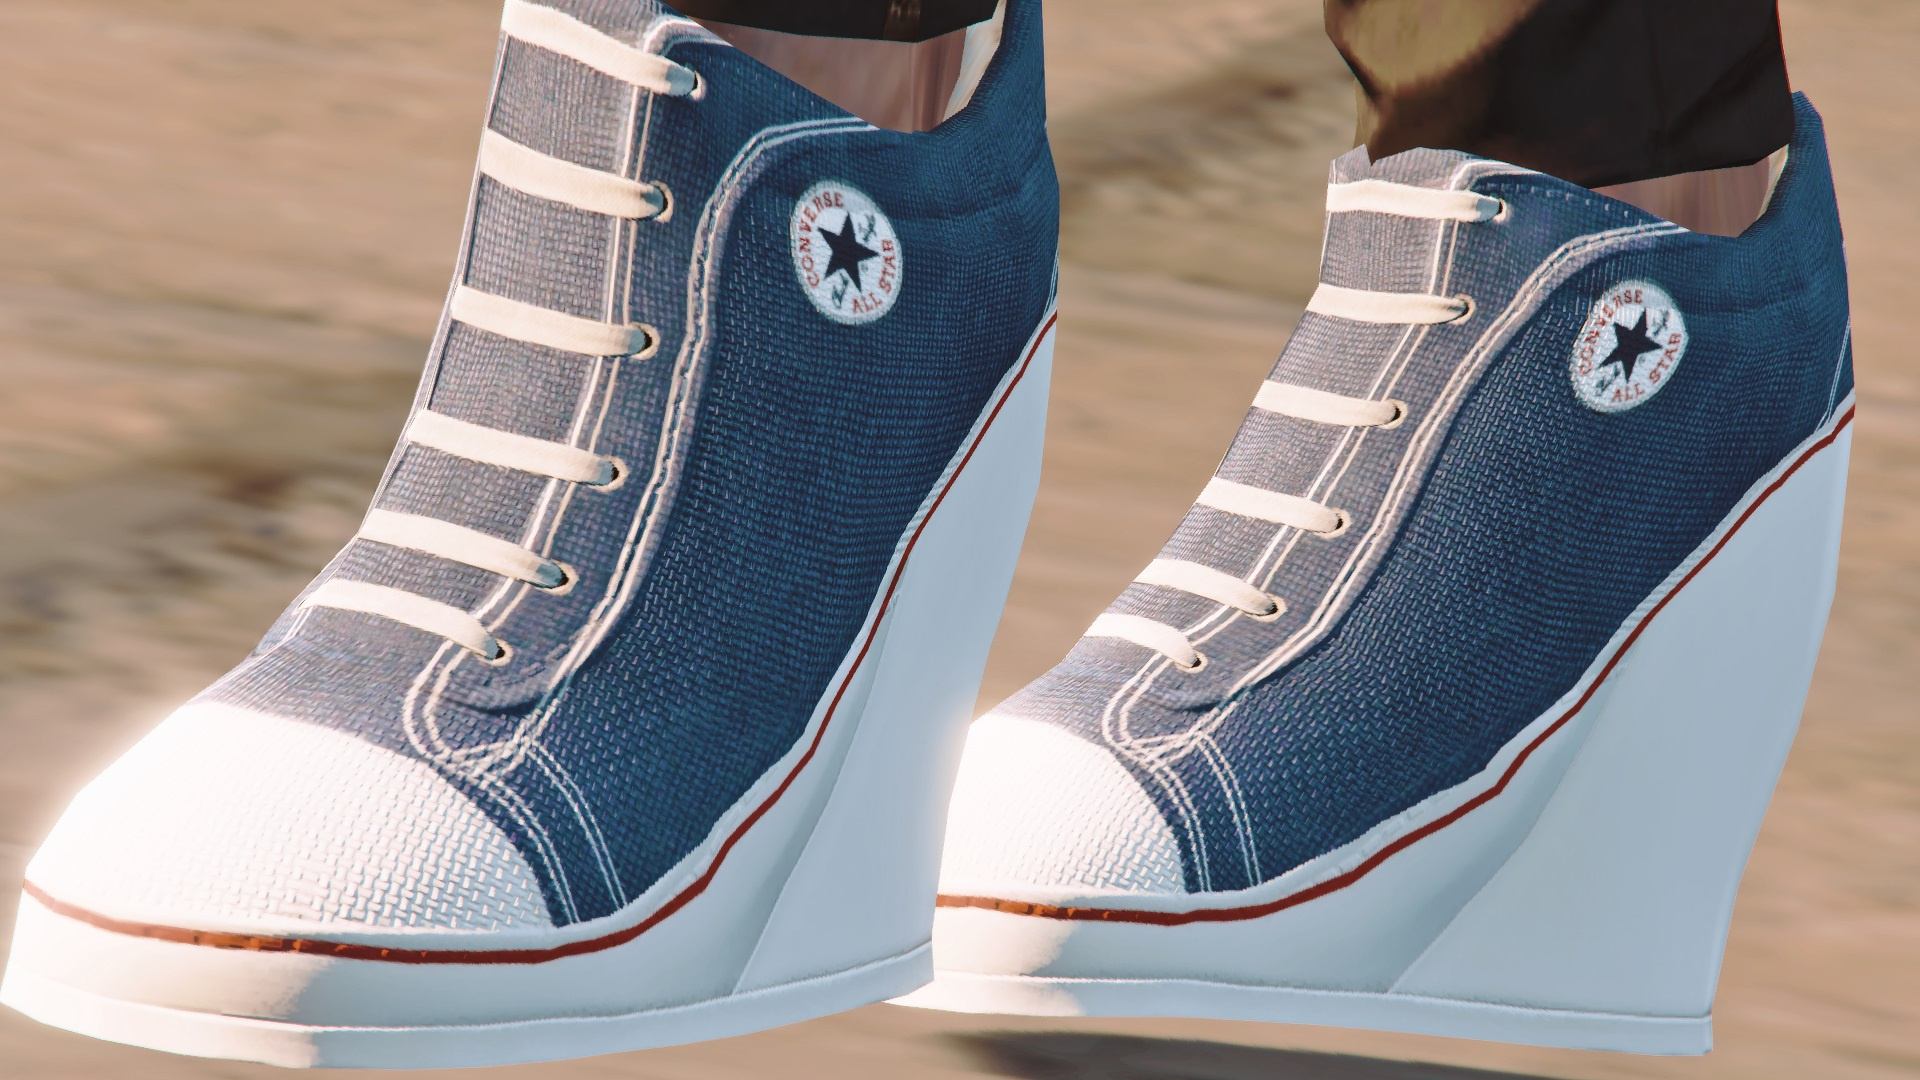 Buy > high heeled converse > in stock